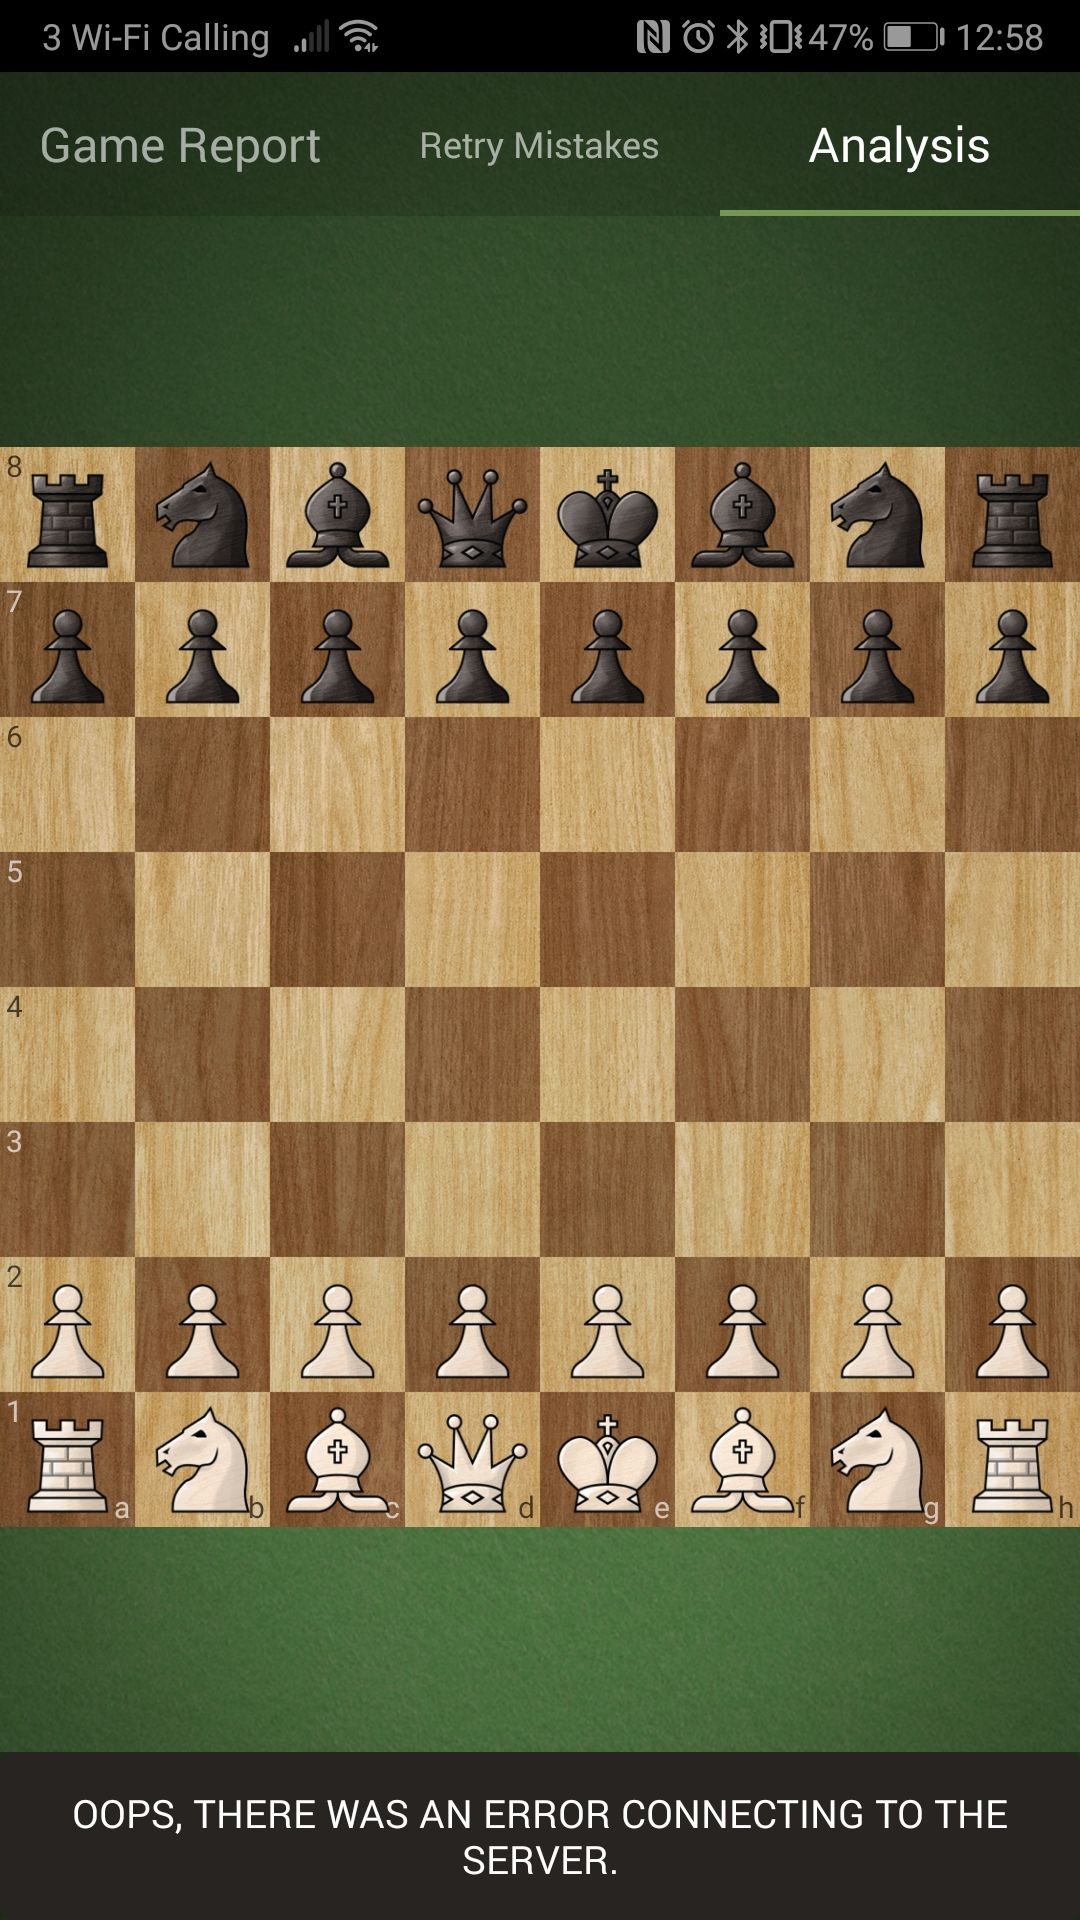 Chess analysis during and after game - Chess Forums 